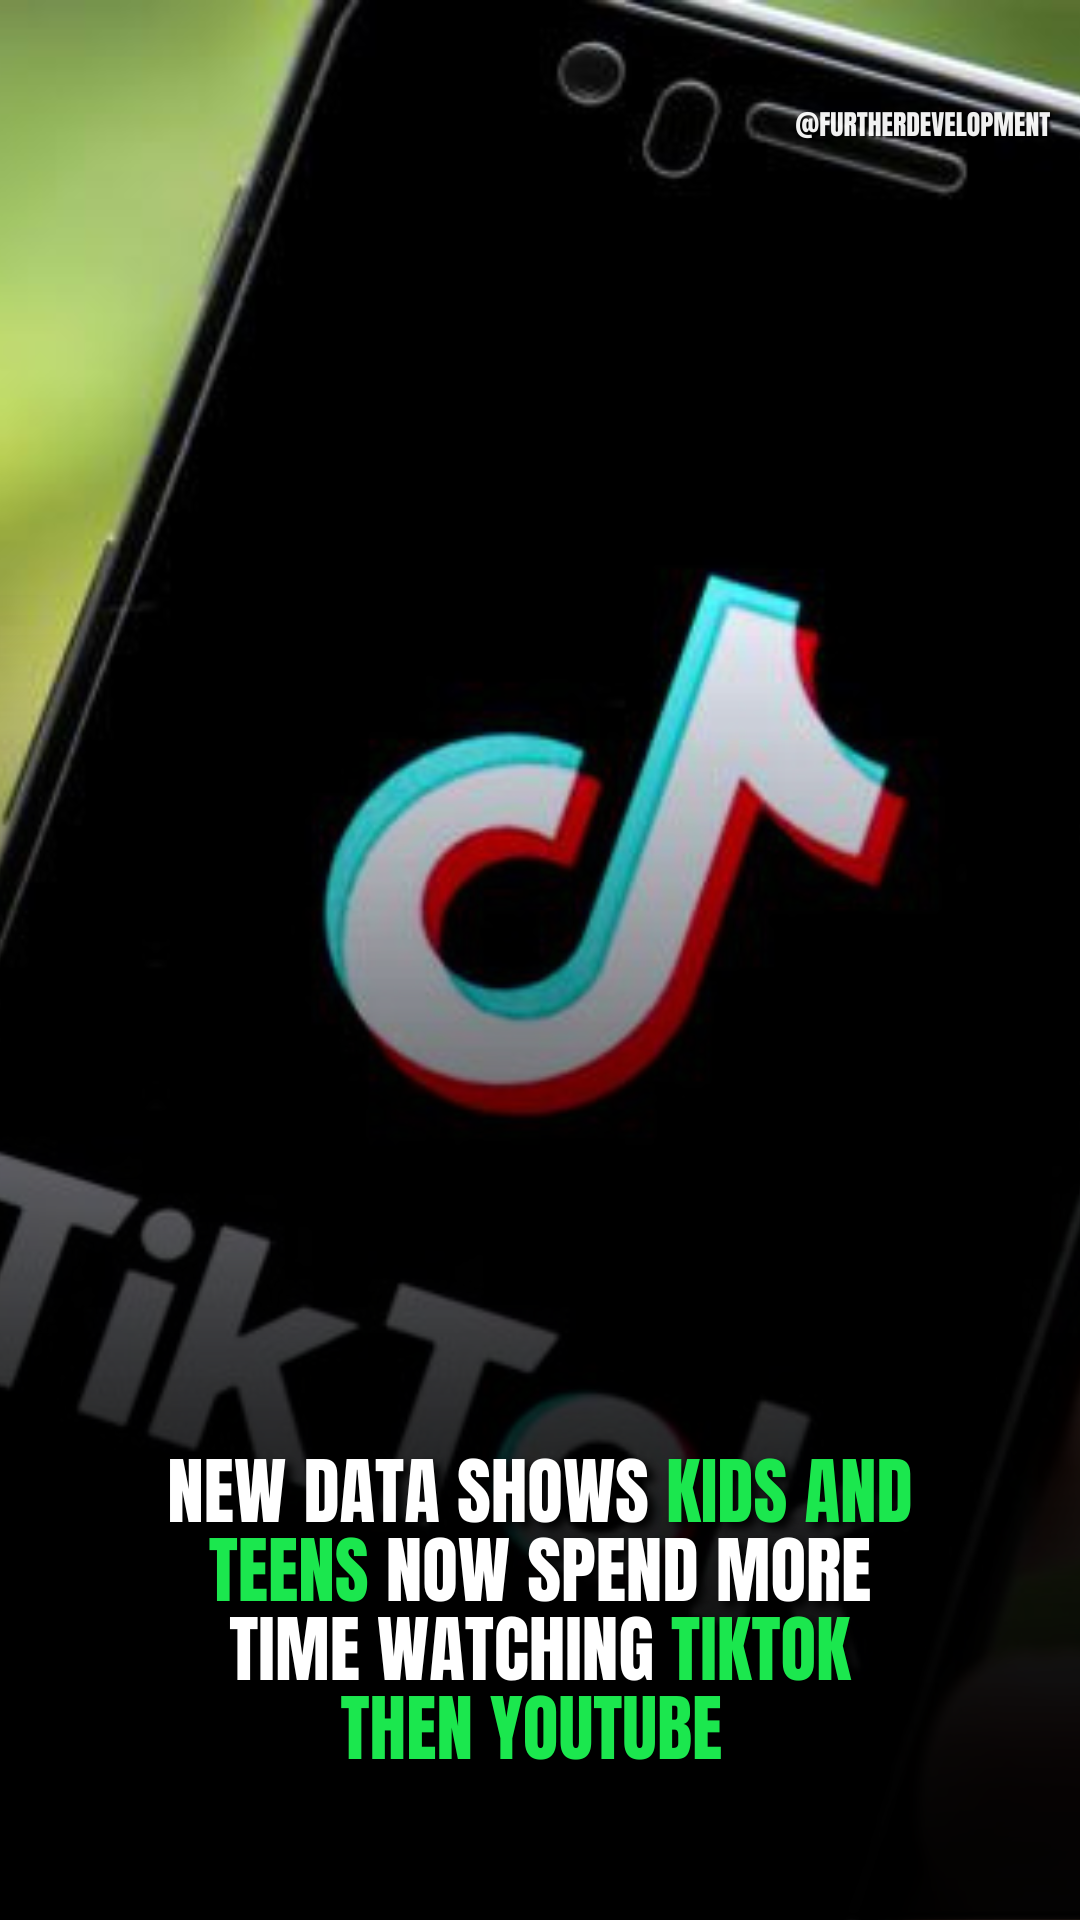 NEW DATA SHOWS KIDS AND TEENS NOW SPEND MORE TIME WATCHING TikTok THAN YOUTUBE